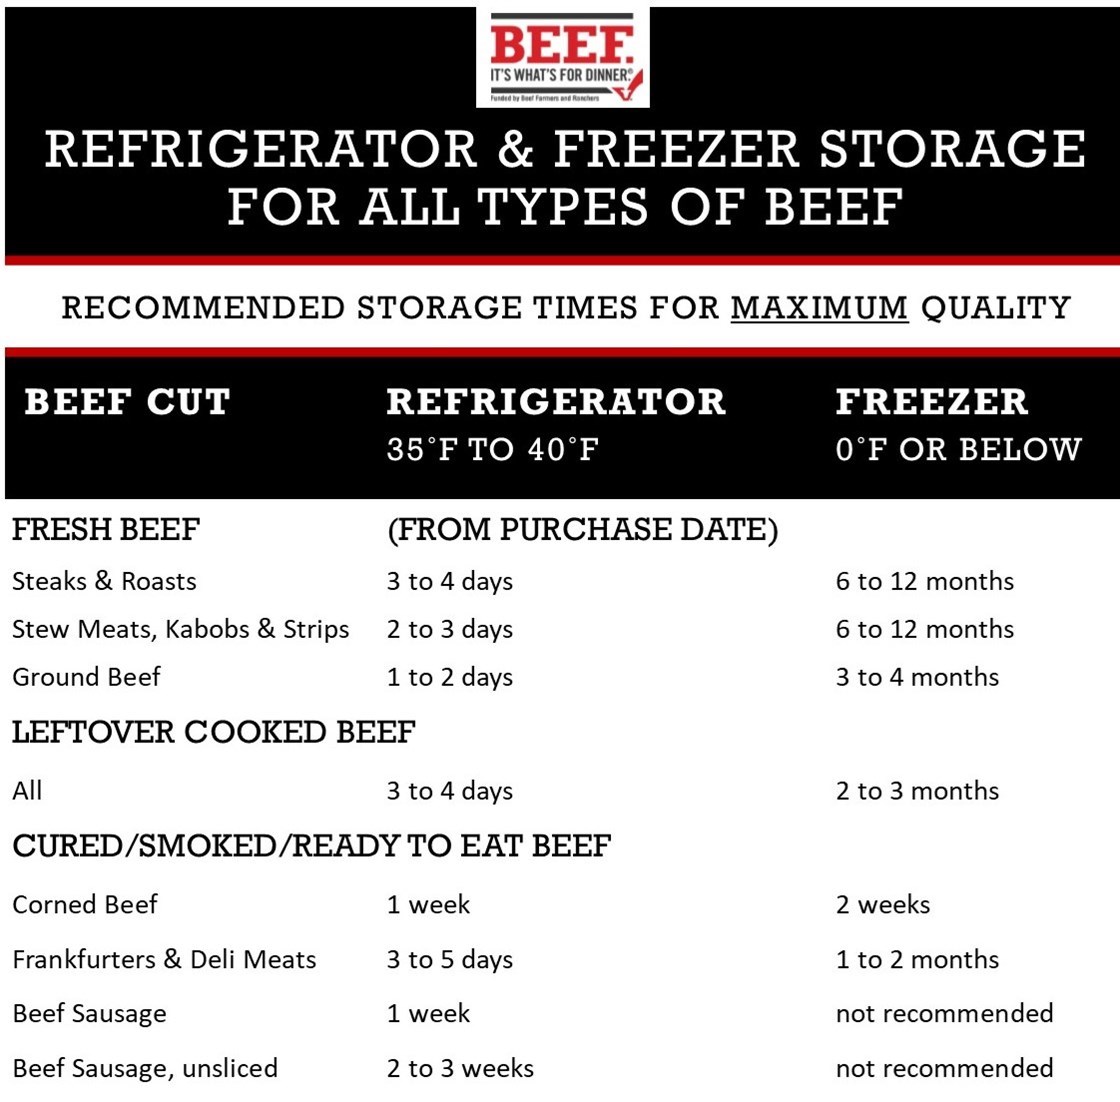 Beef Safety